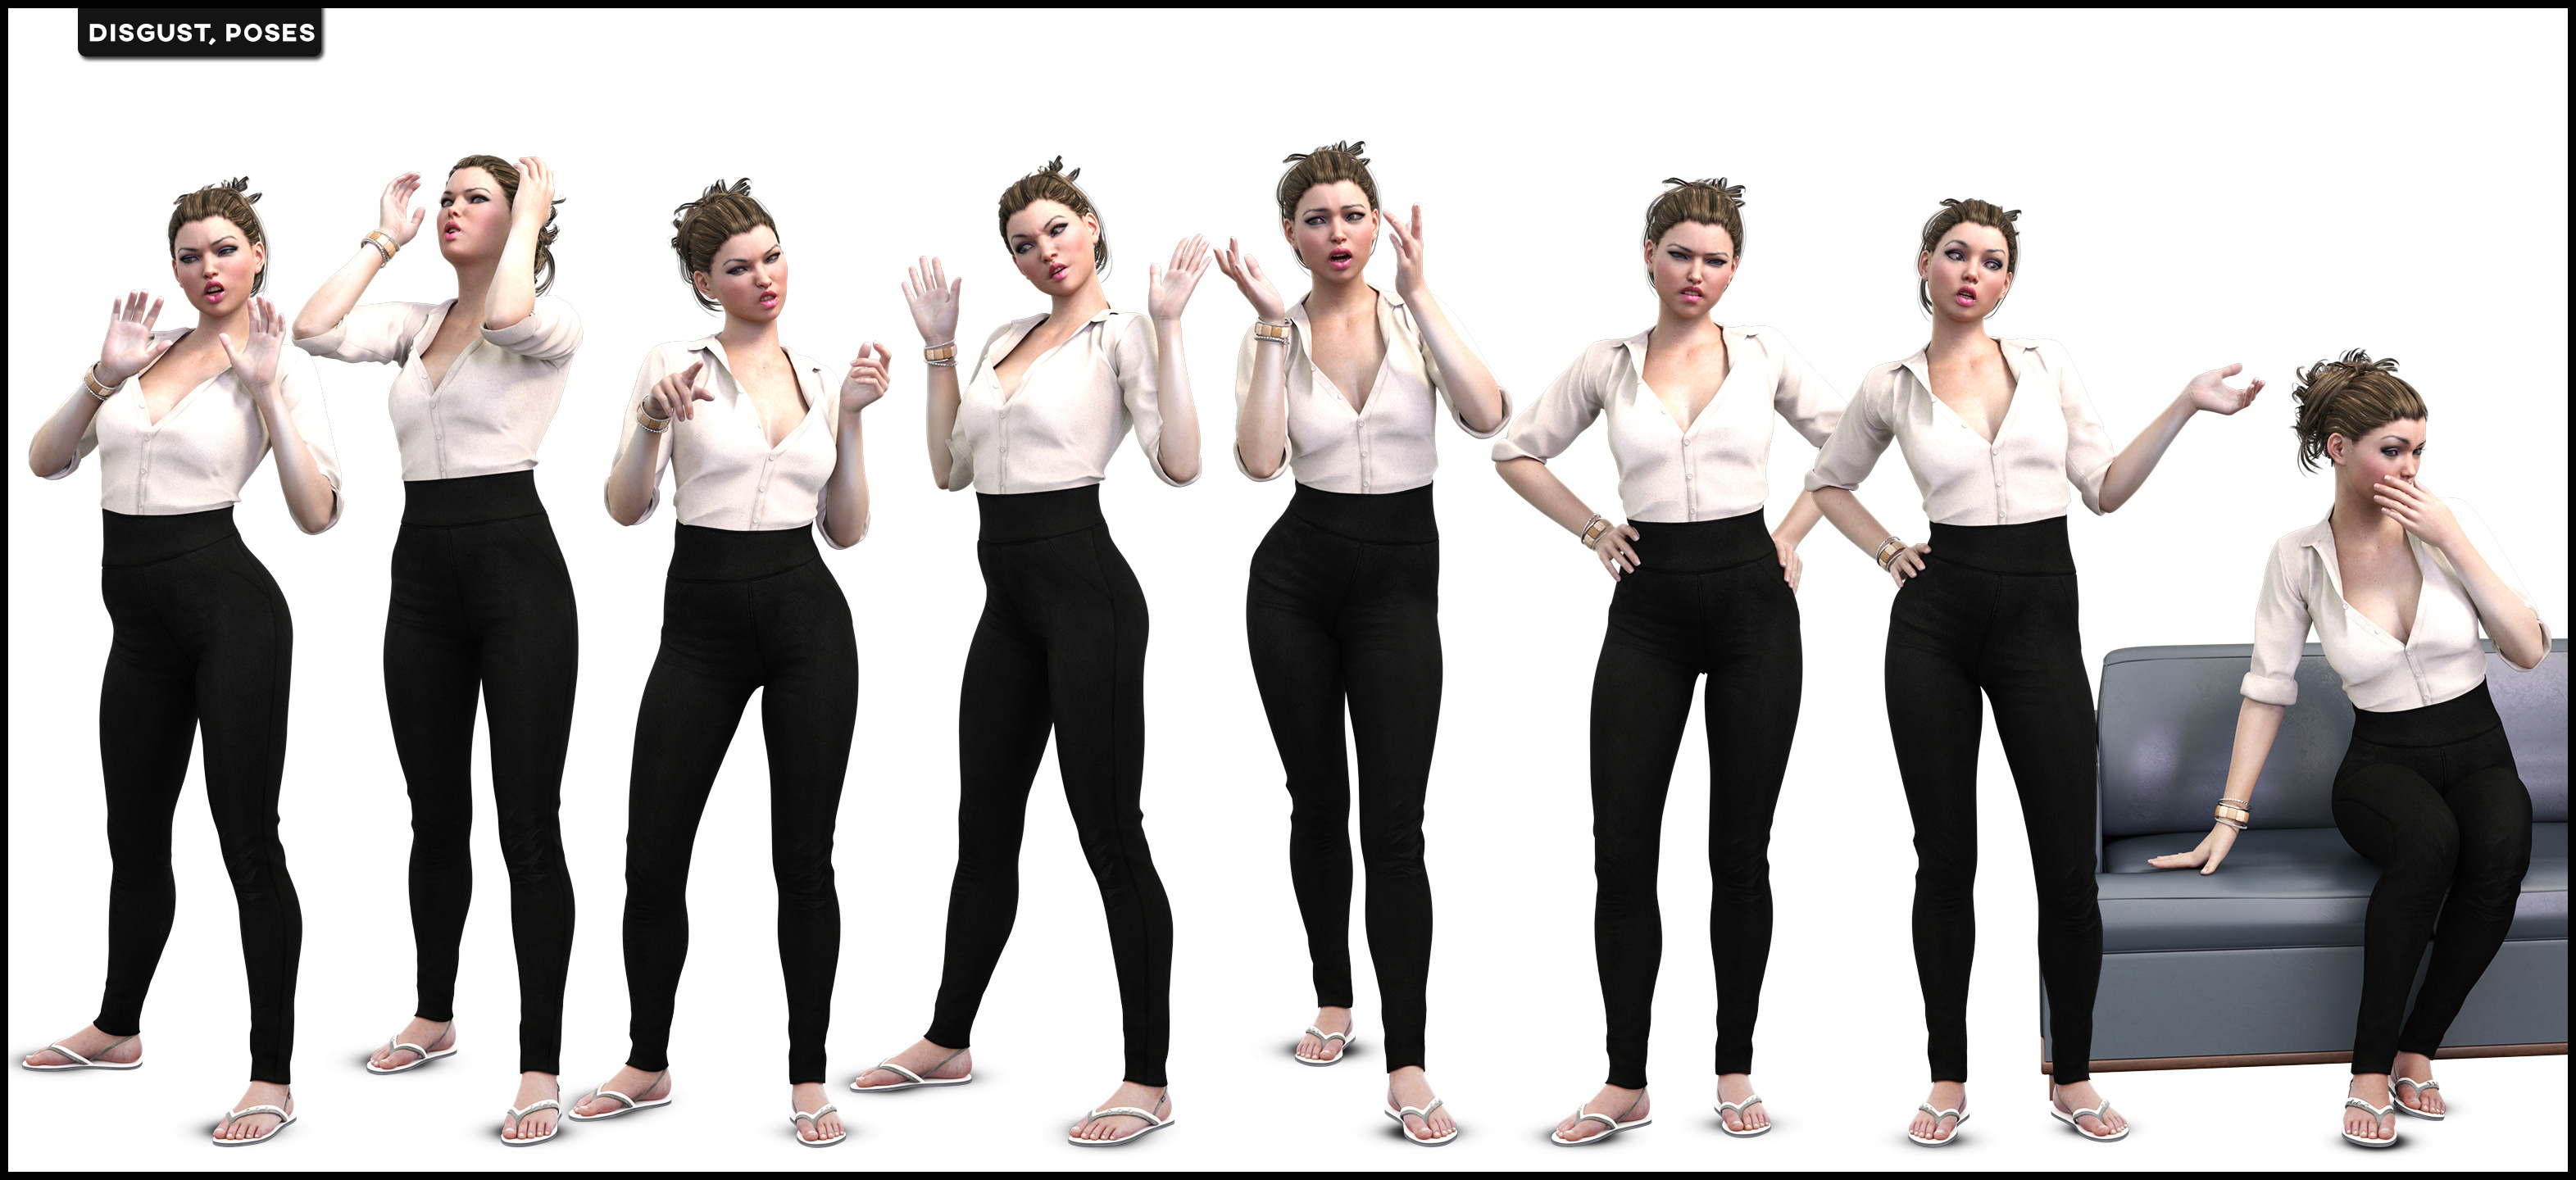 i13 Anger Disgust and Rage Poses and Expressions for Genesis 3 Female(s) by: ironman13, 3D Models by Daz 3D